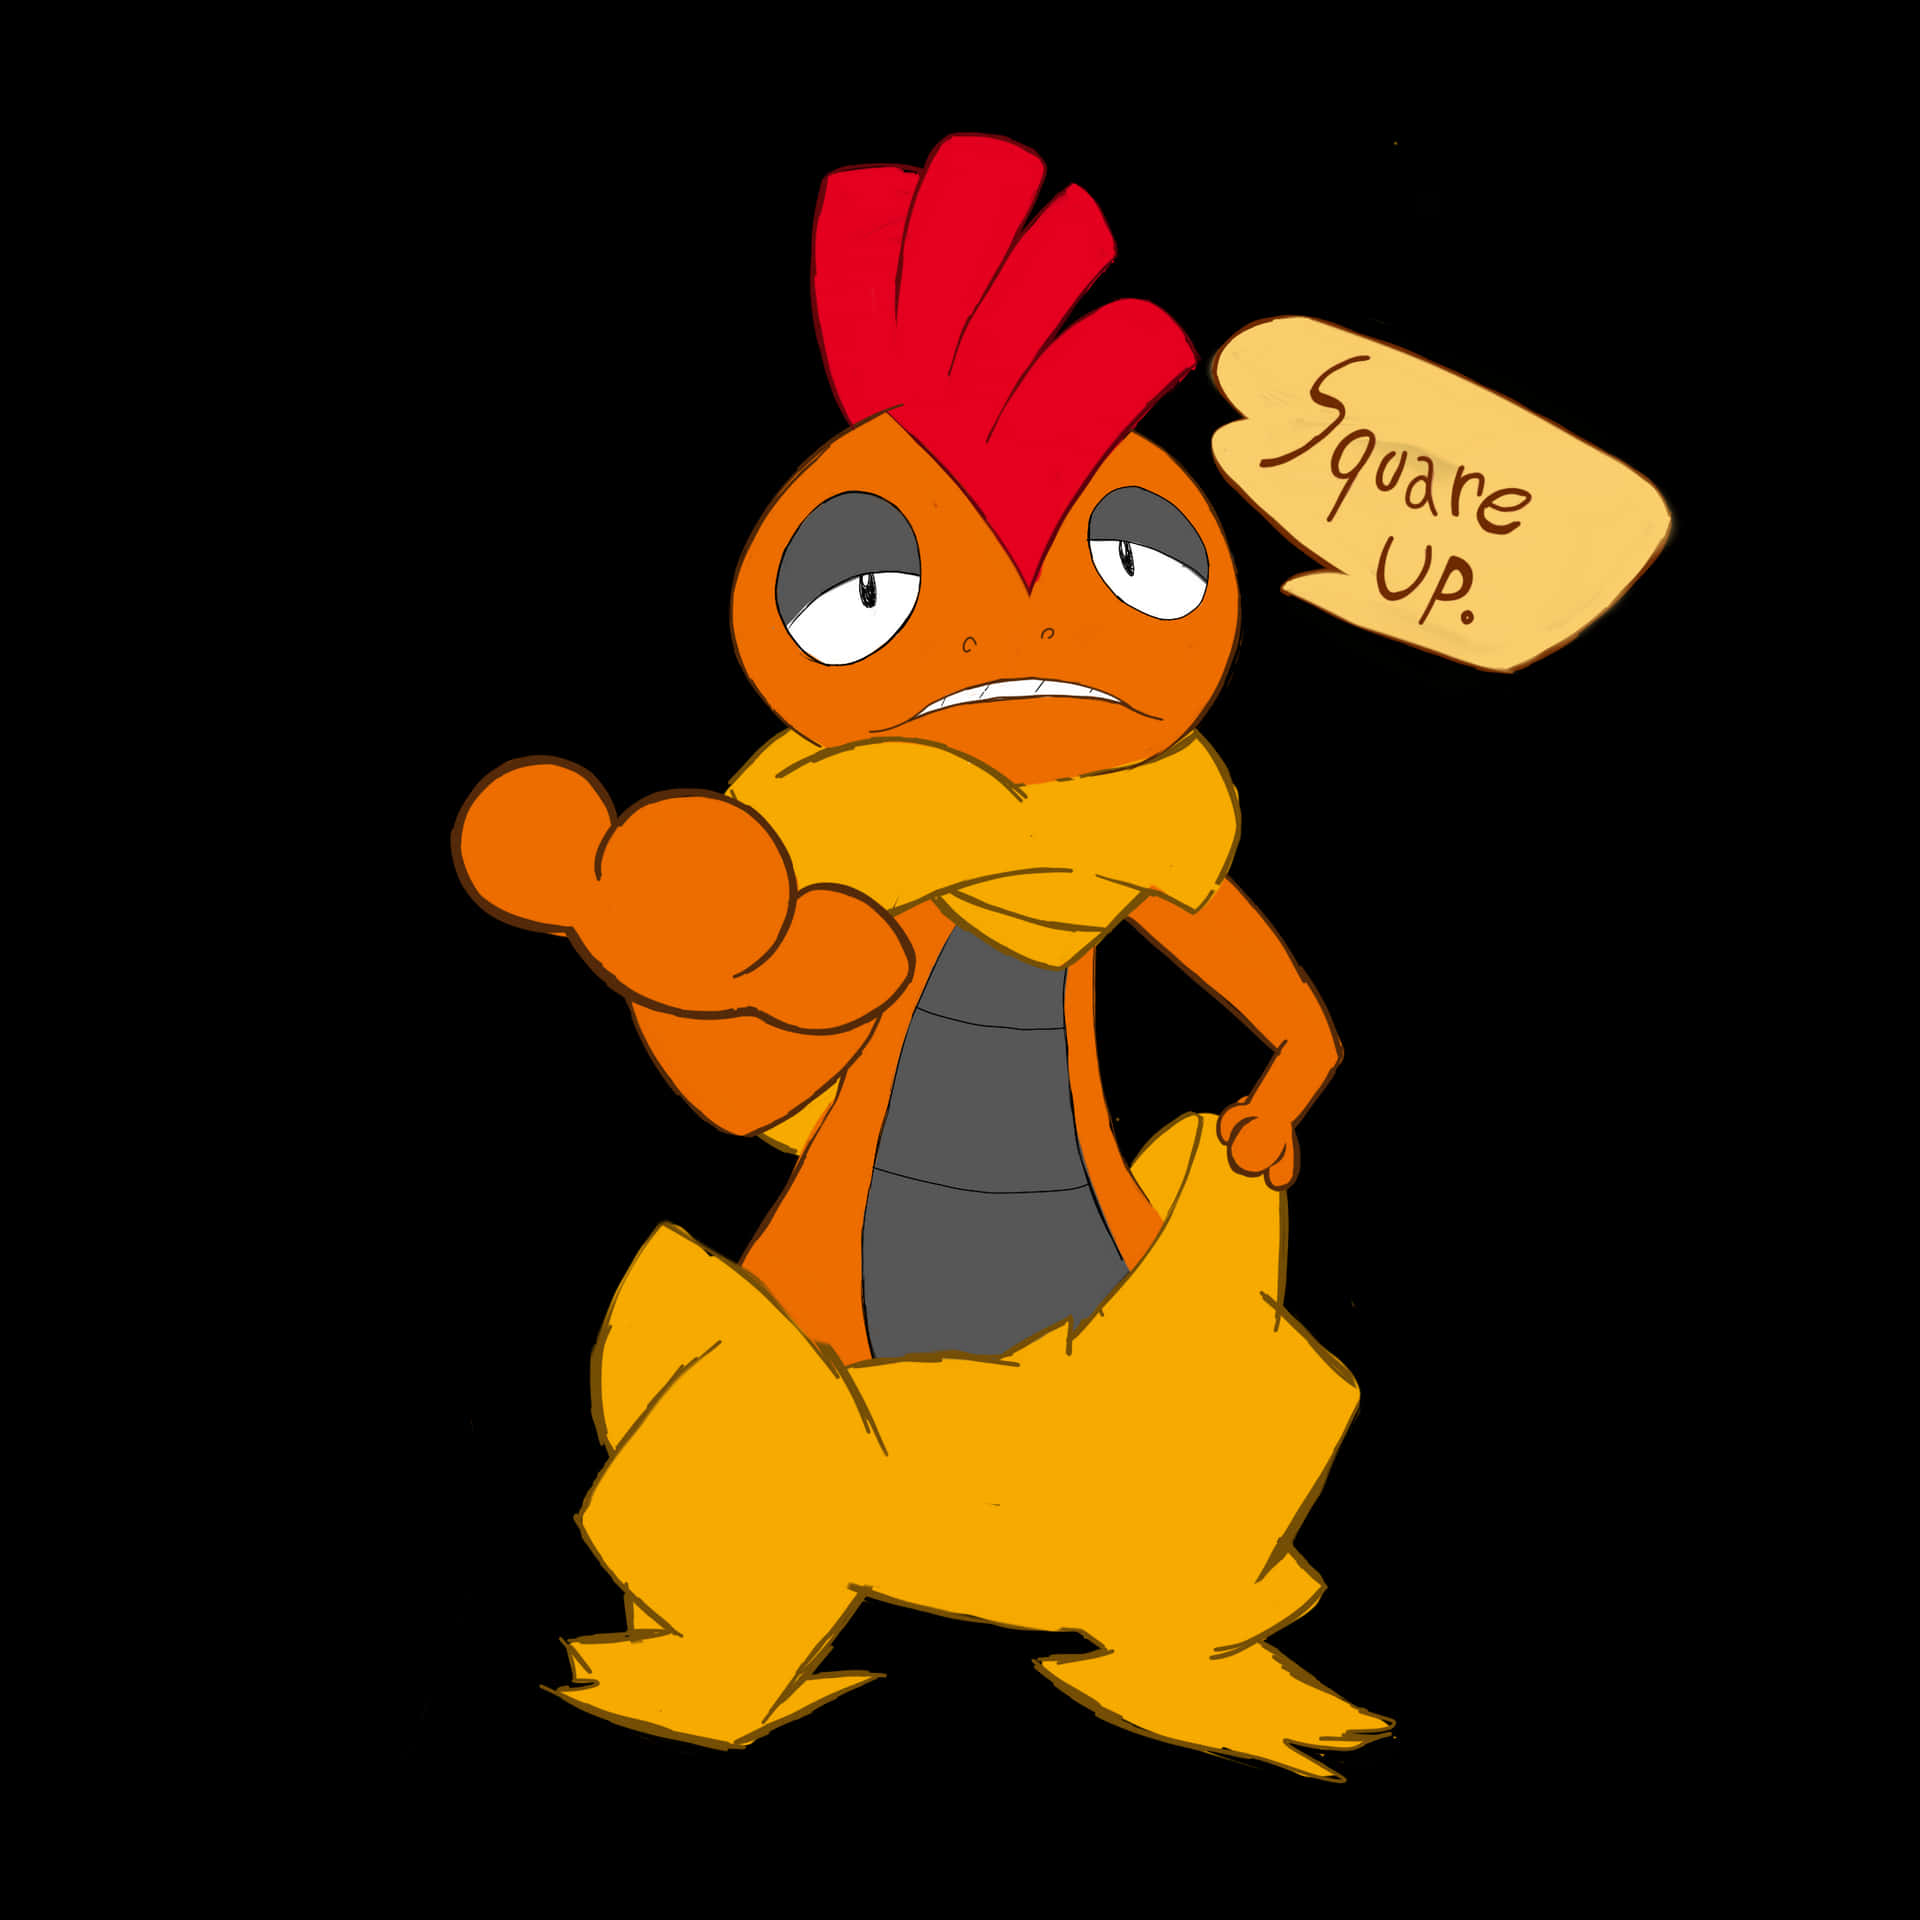 Scrafty Square Up Wallpaper